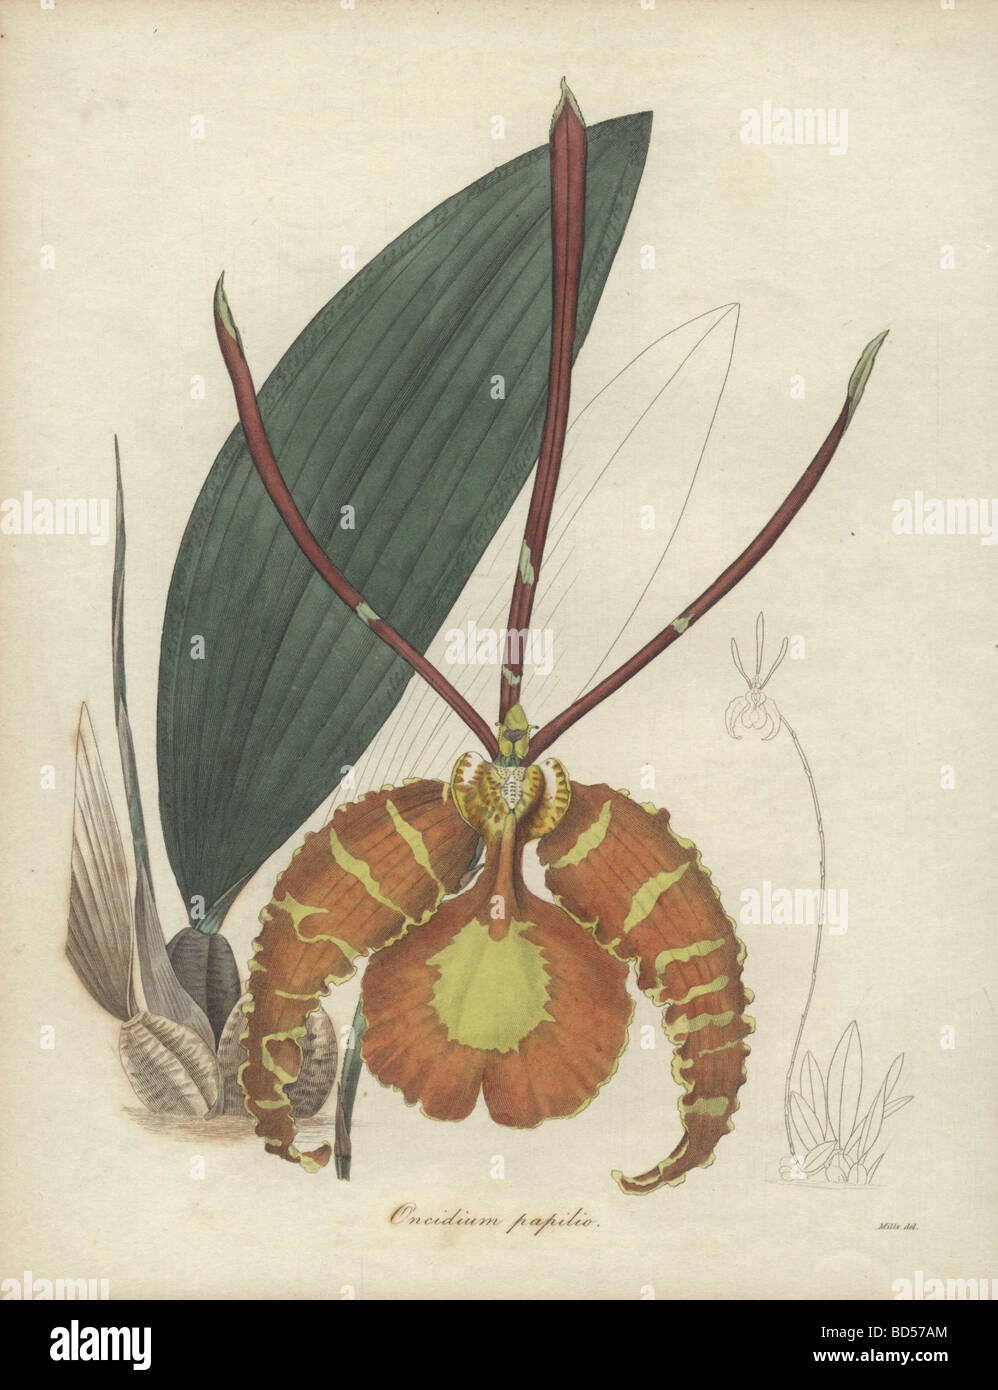 Copperplate engraving of a yellow and orange butterfly orchid (Oncidium papilio) from 'The Botanist' (1836). Stock Photo